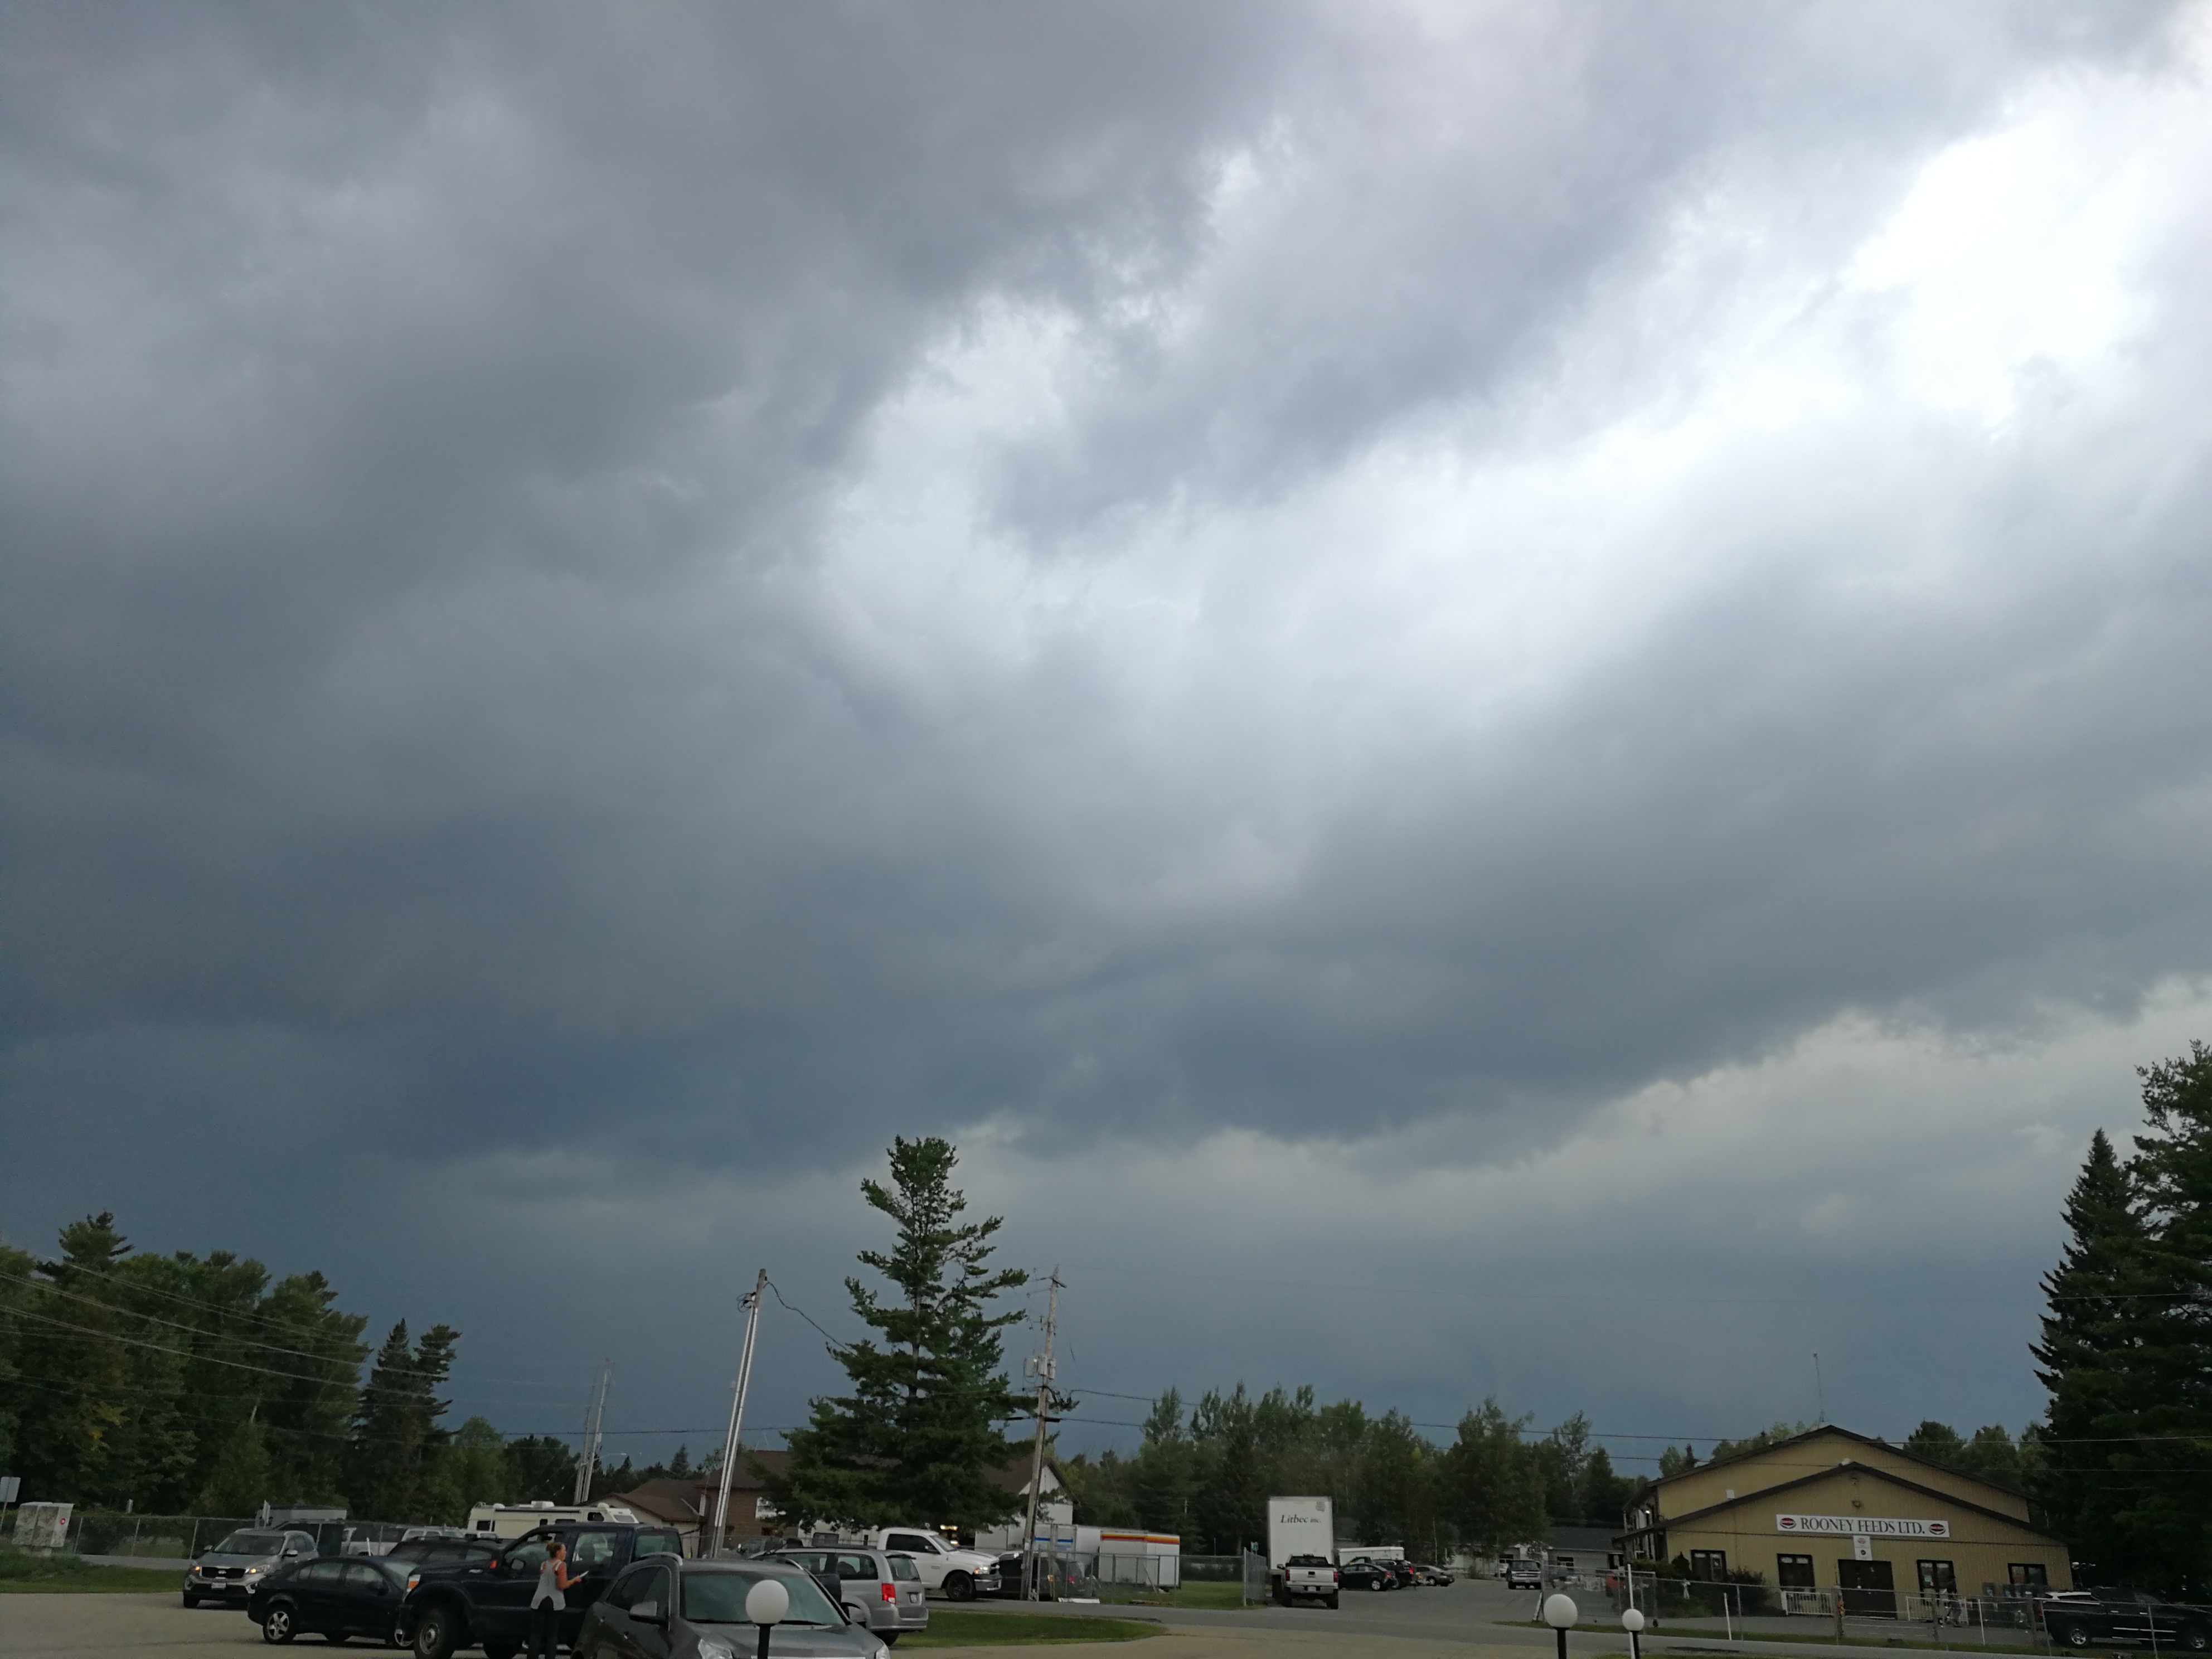 Tornado warning issued for Smiths Falls - My Kemptville Now3968 x 2976